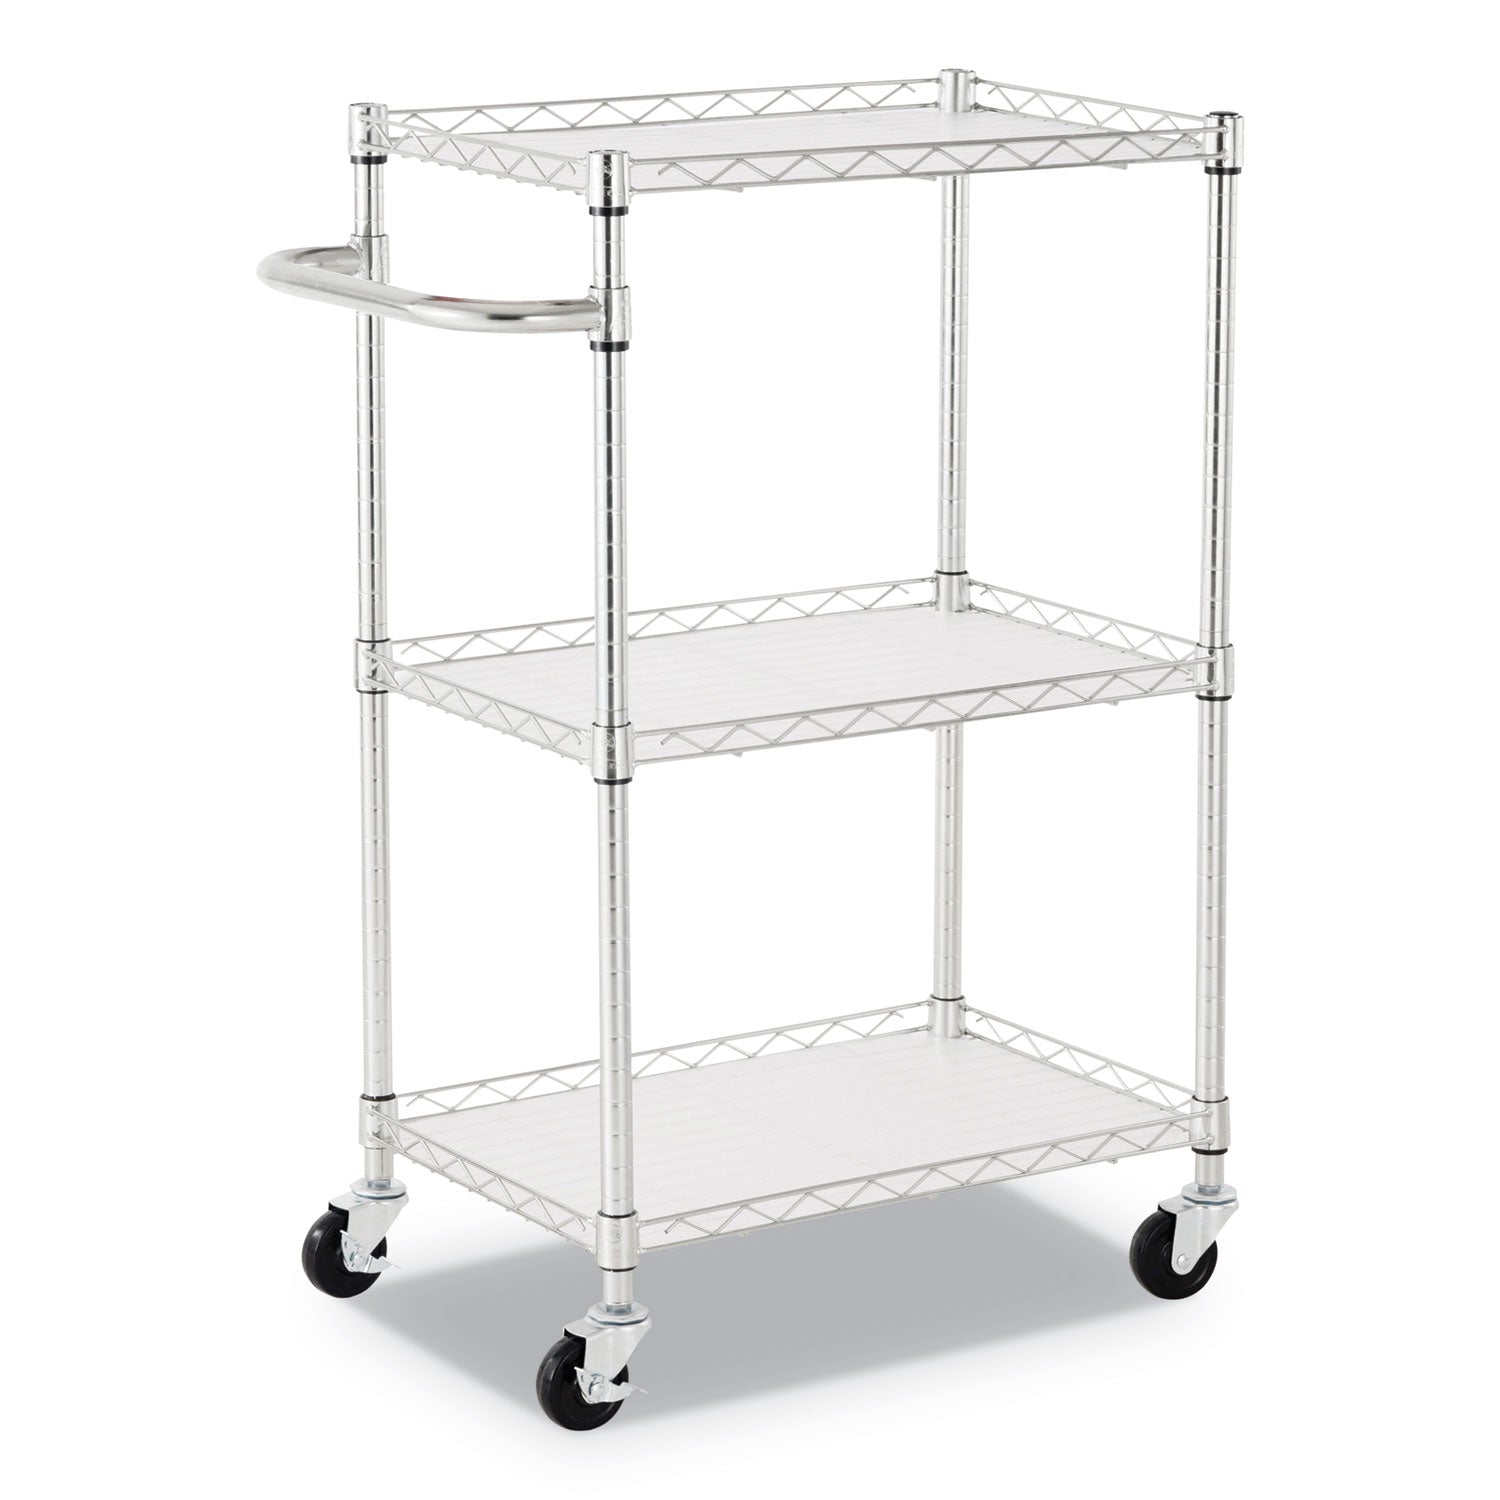 three-shelf-wire-cart-with-liners-metal-3-shelves-450-lb-capacity-24-x-16-x-39-silver_alesw322416sr - 1